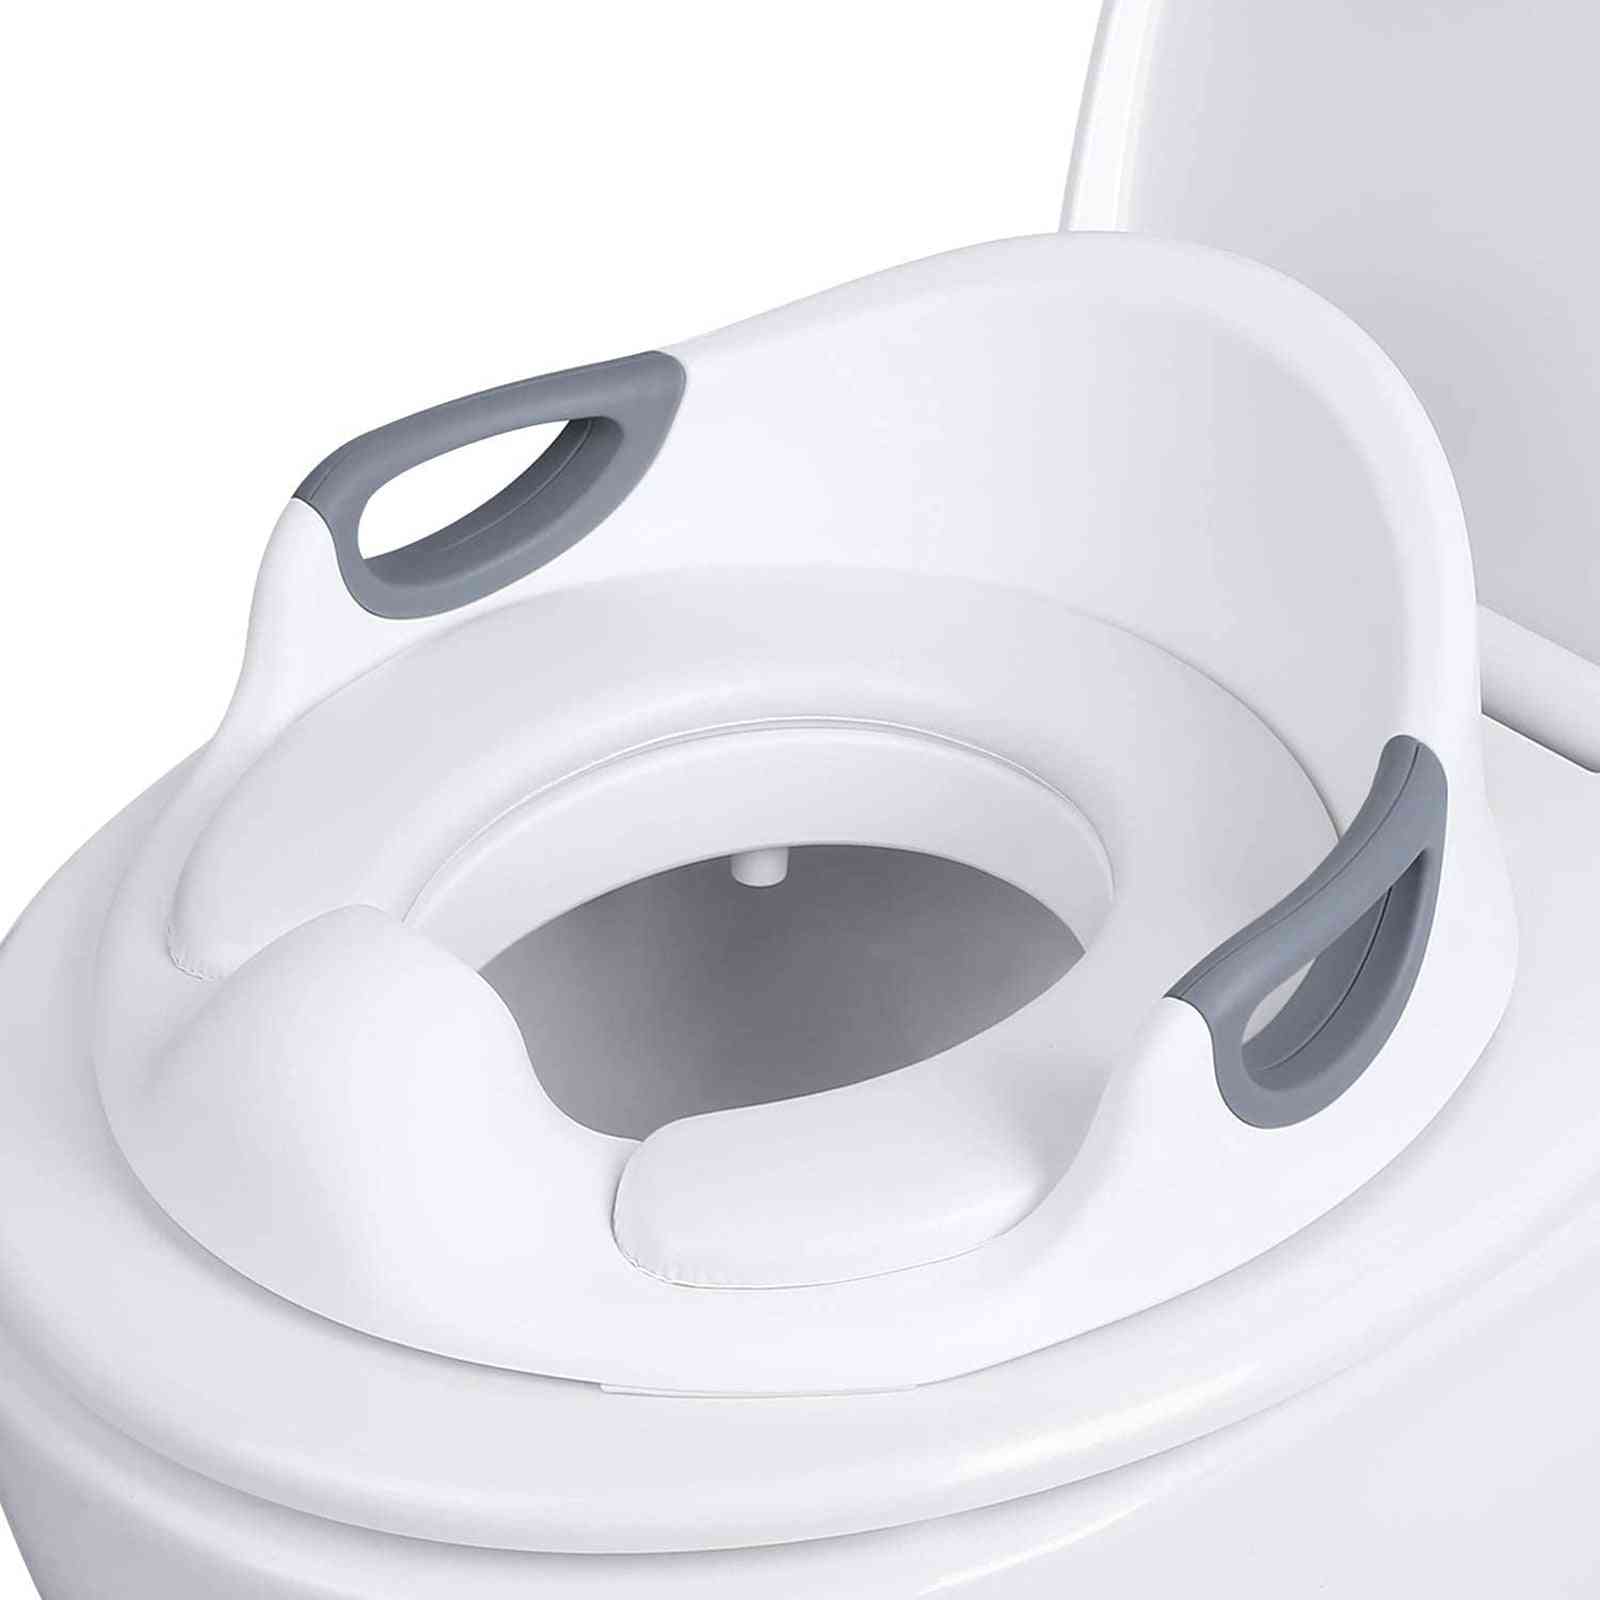 Portable Unisex Potty Training Urinal Toilet Seats For